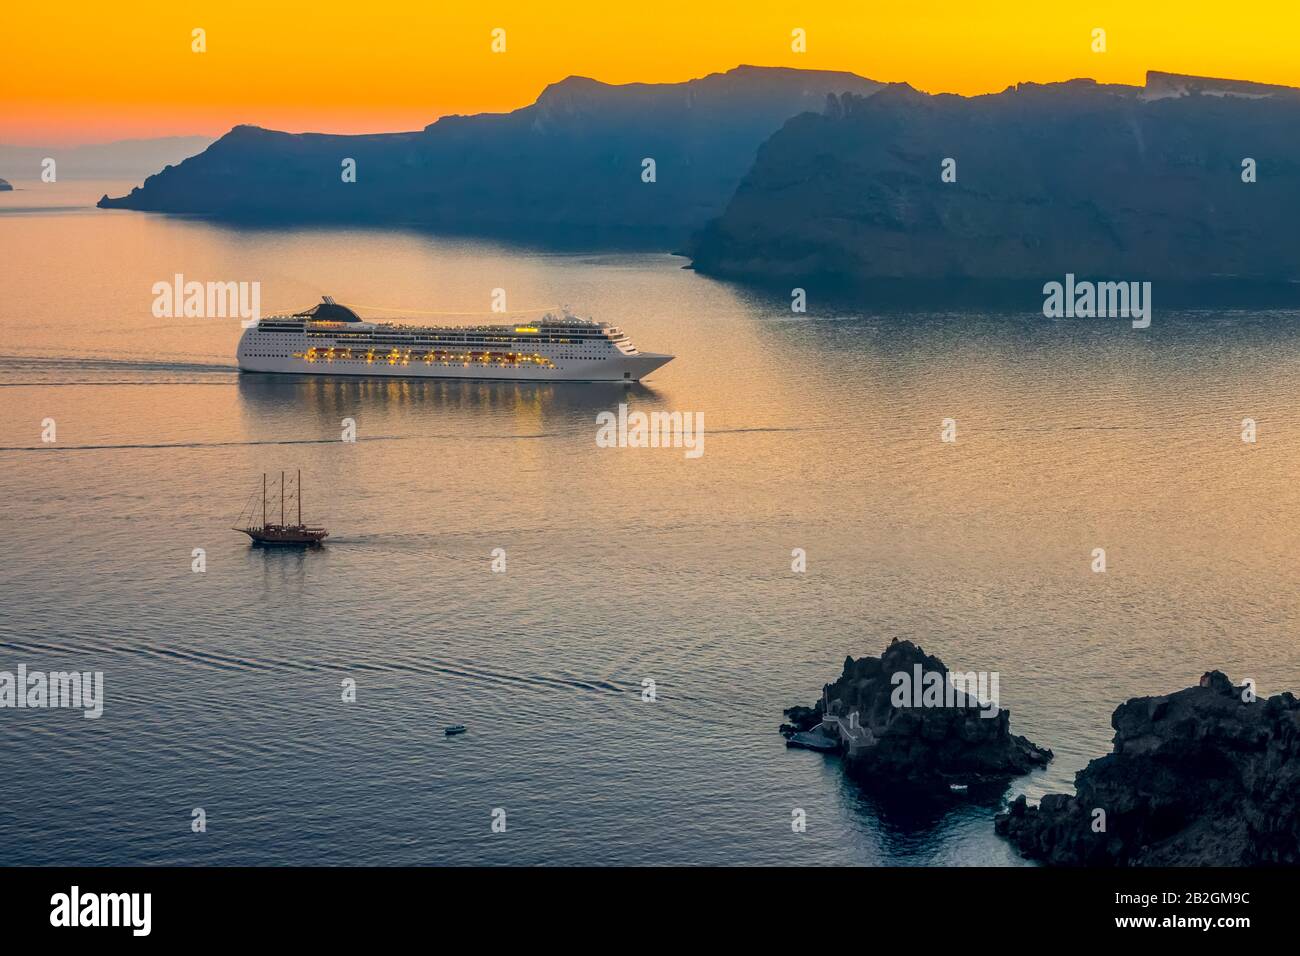 Greece. Sea view from Oia (Santorini, Thita island) at sunset. Large cruise ship in the lagoon and a small sailing ship Stock Photo